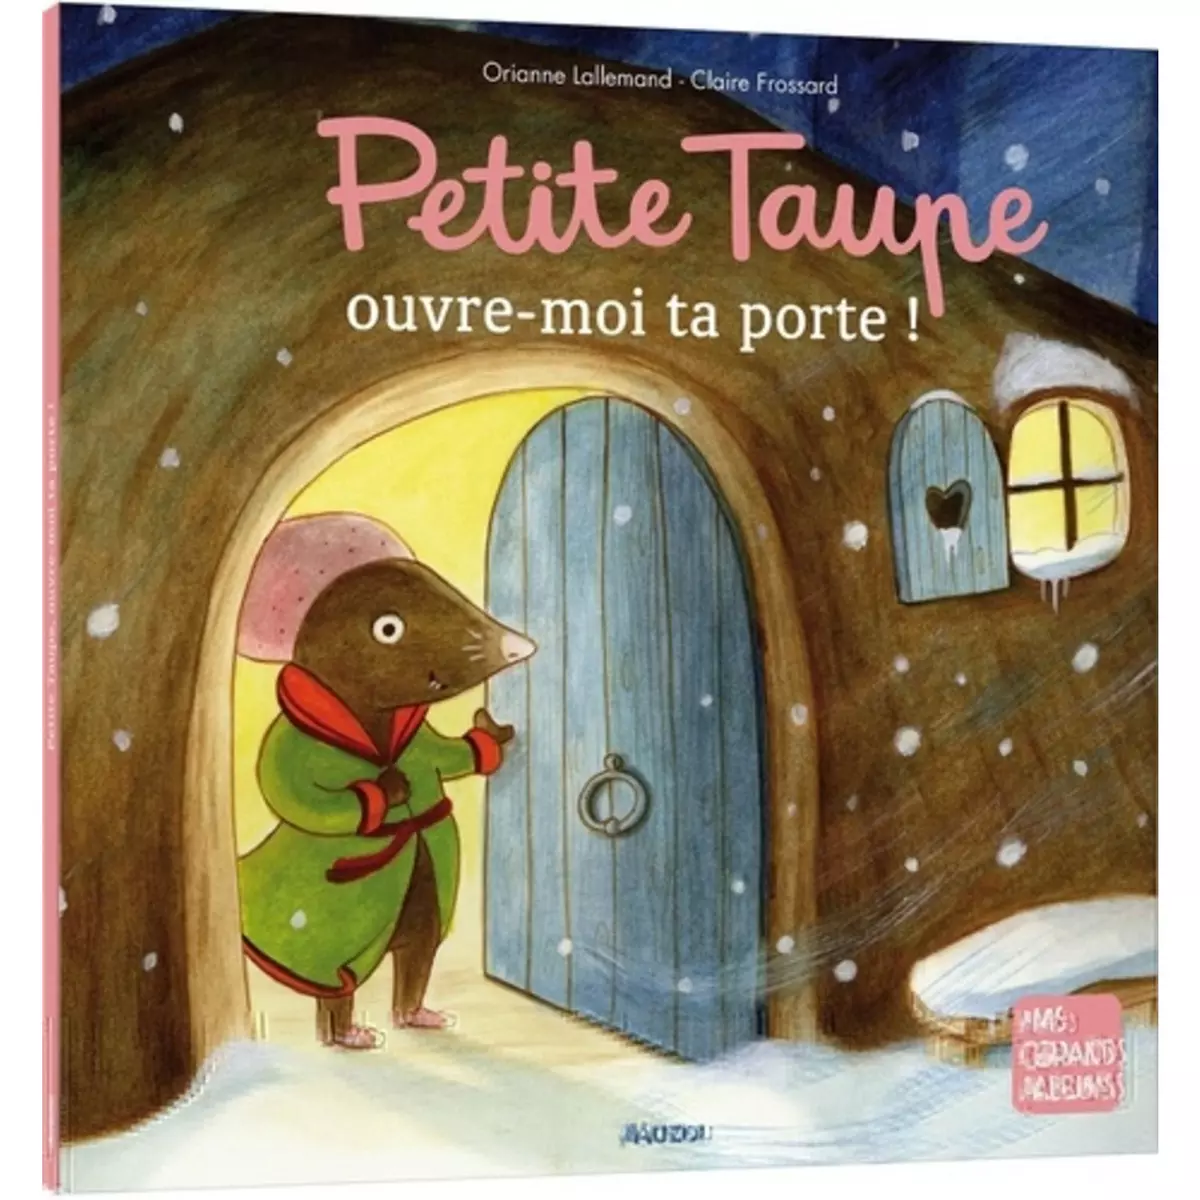  PETITE TAUPE : PETITE TAUPE, OUVRE-MOI TA PORTE !, Lallemand Orianne